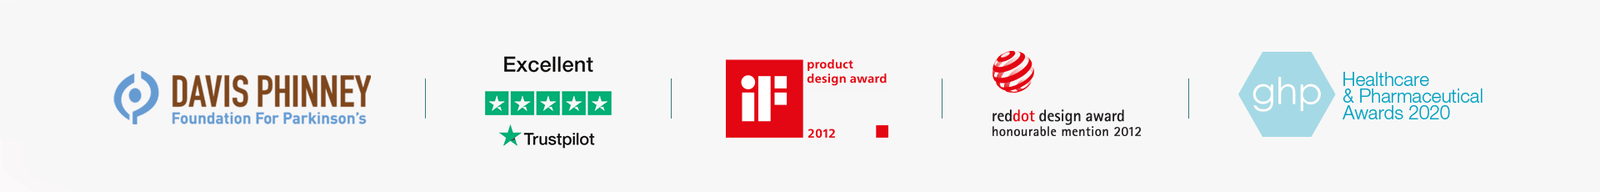 Five logos of awards that have been won by 'Rollz', a company that designs walking frames. 